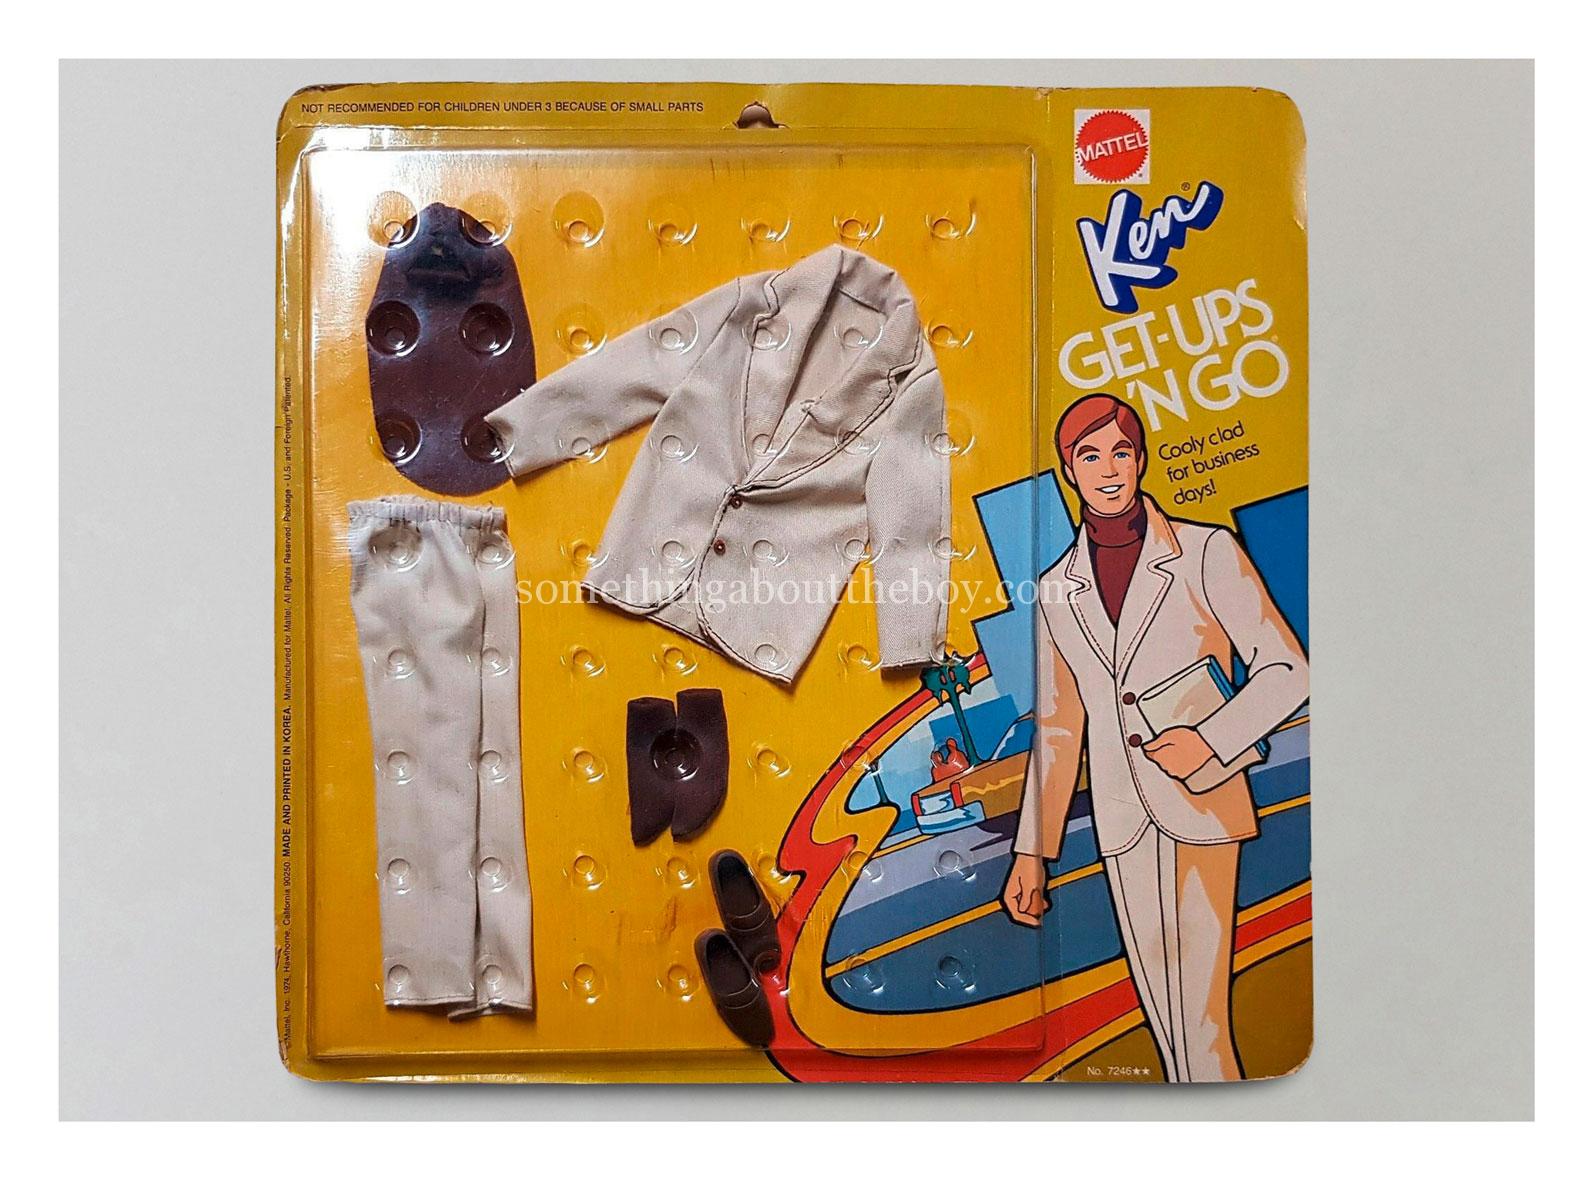 1975 Get-Ups 'N Go #7246 (Version with 2 buttons on jacket)